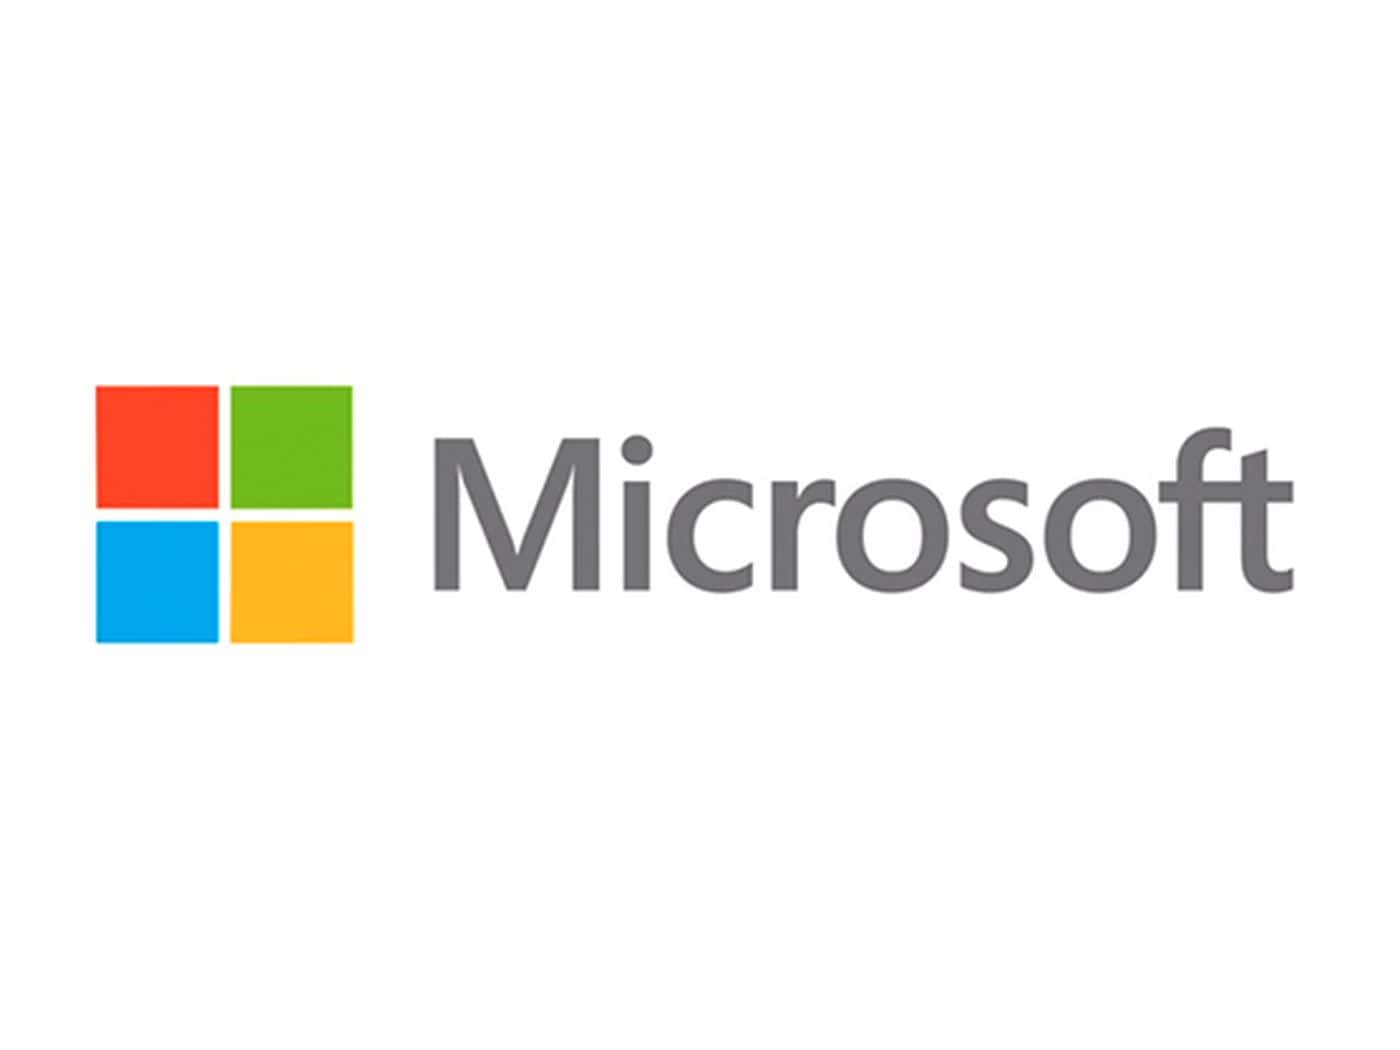 What to Expect From ‘What’s Next in Security from Microsoft’ Digital Event